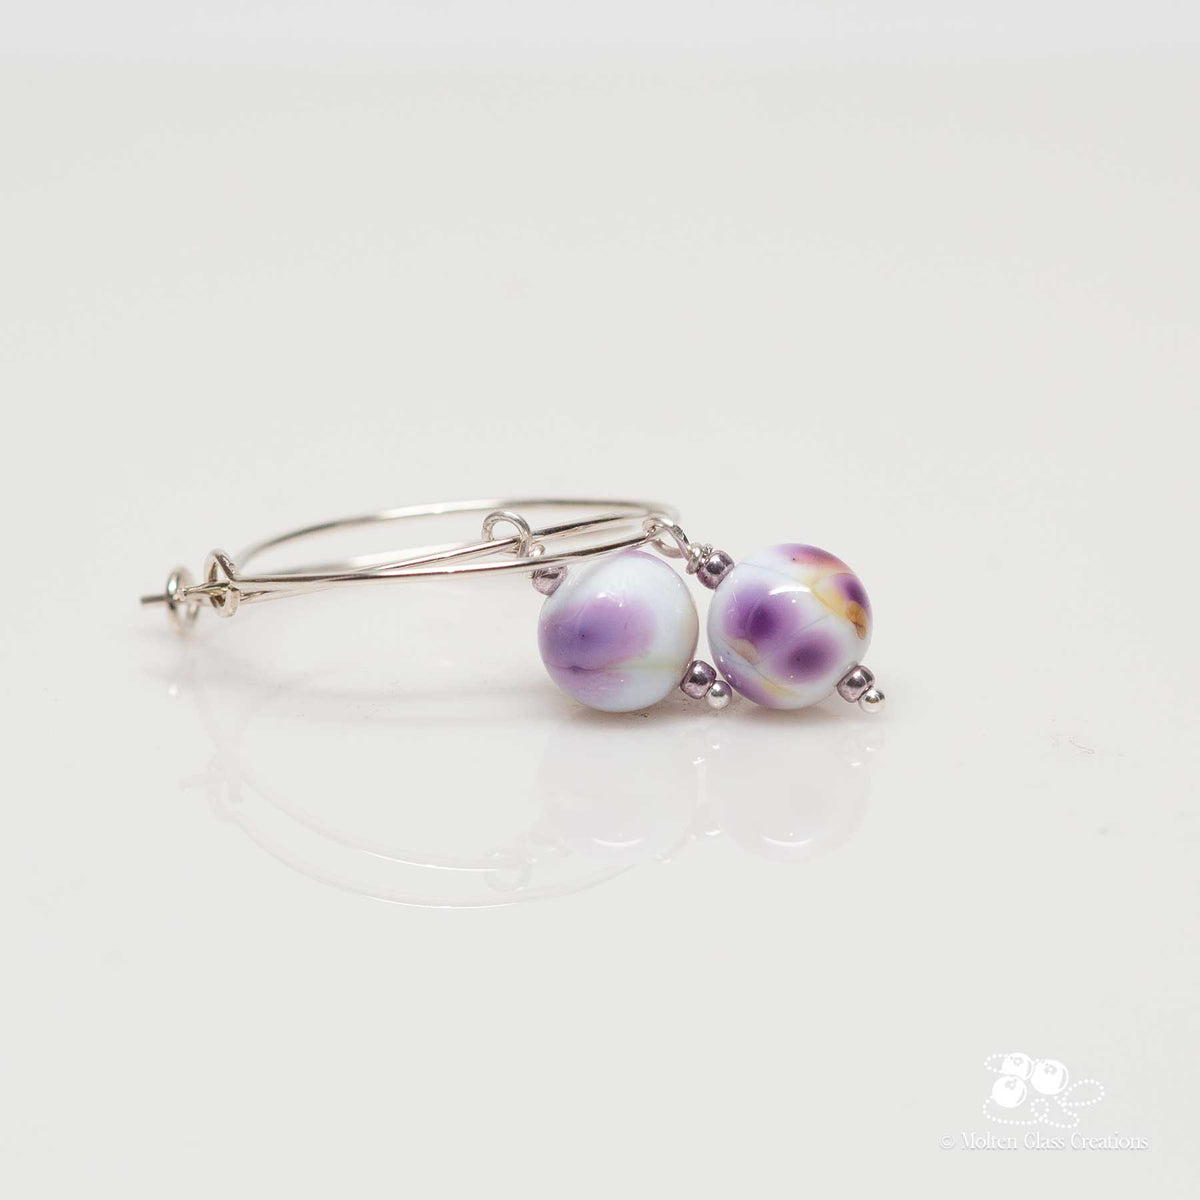 dainty glass beads in a rose color